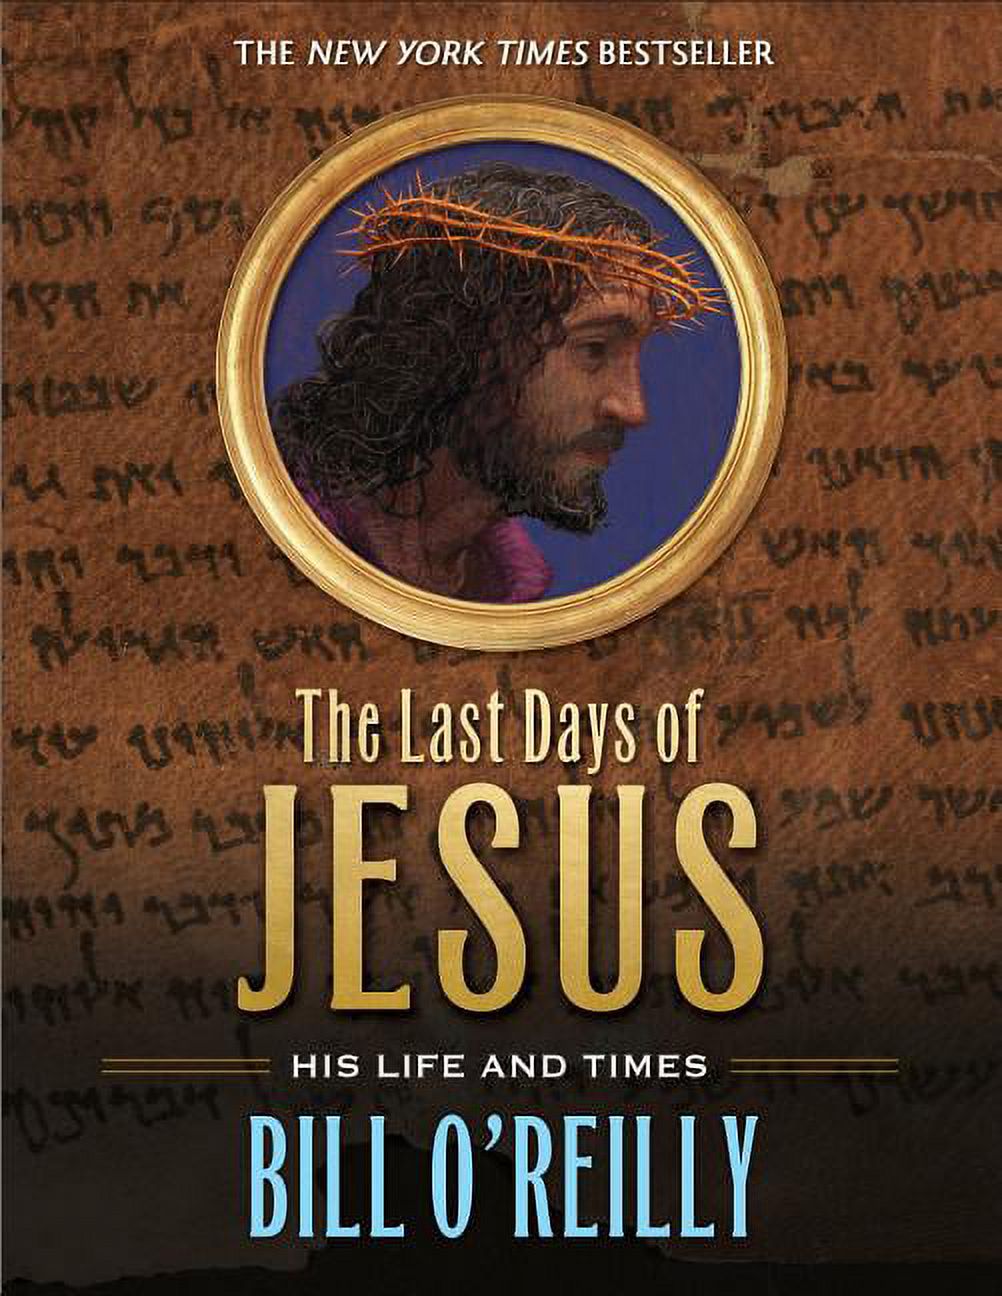 The Last Days of Jesus : His Life and Times (Paperback) - image 1 of 1